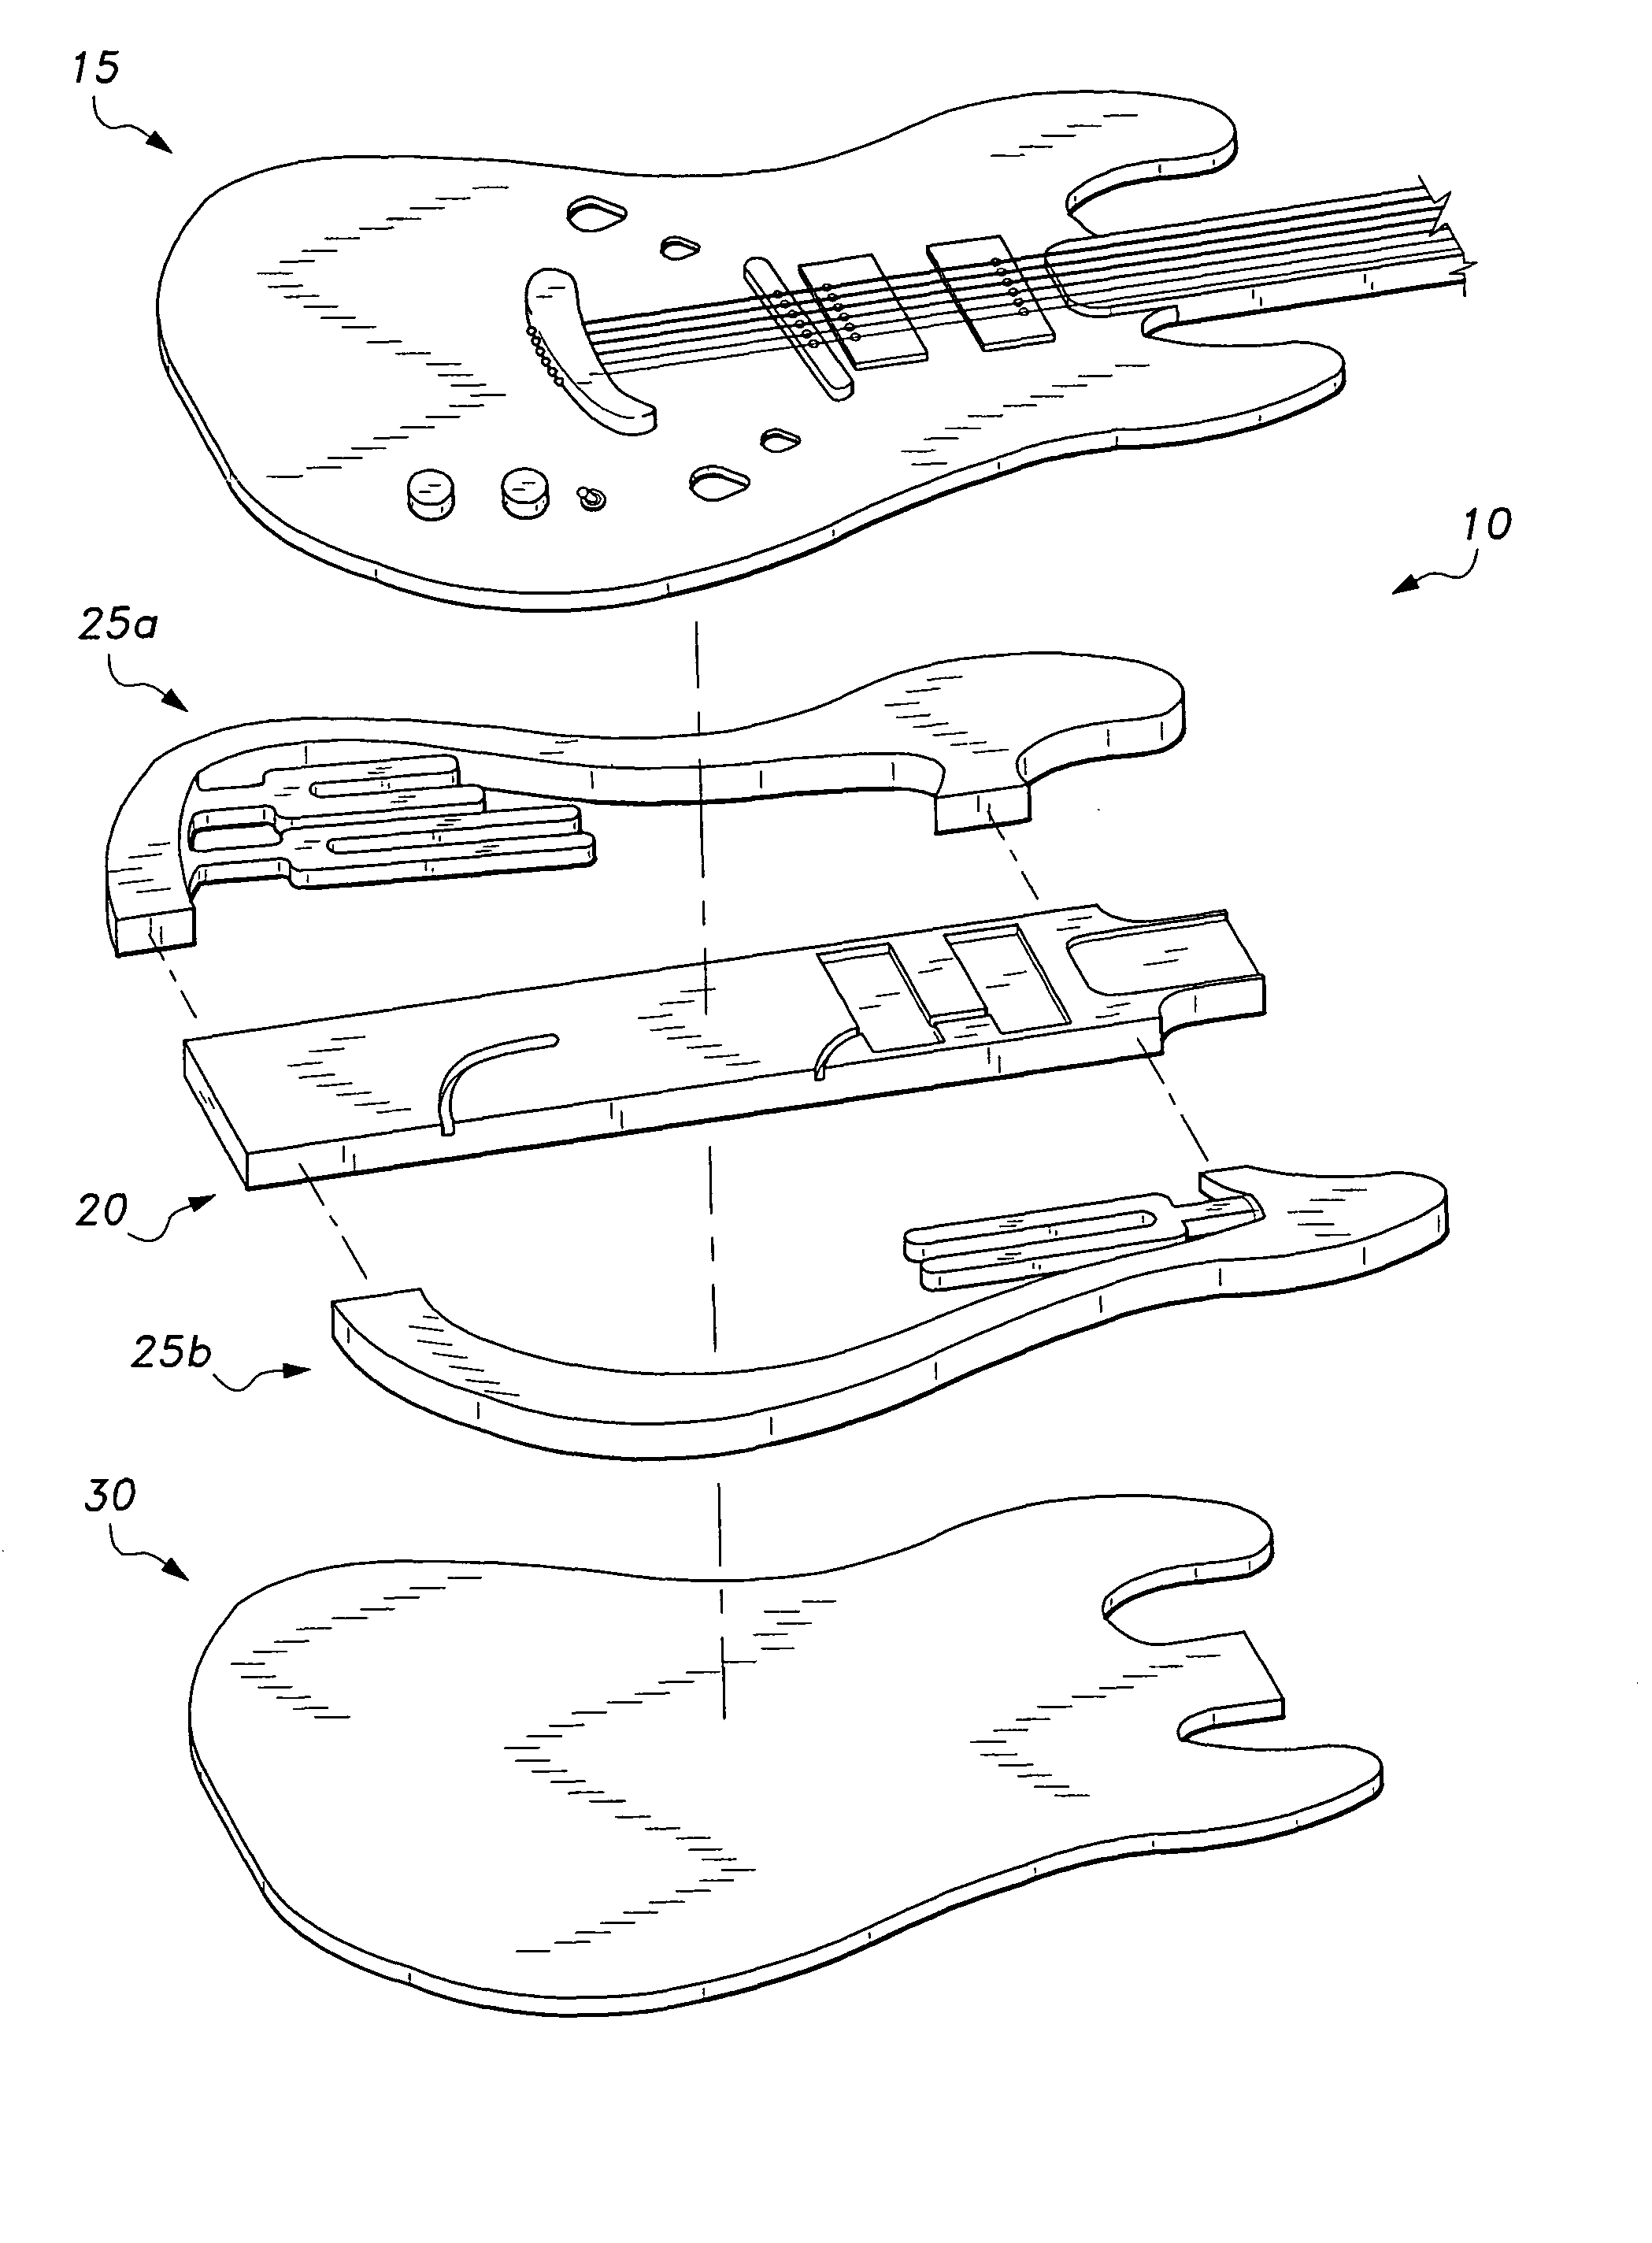 Semi-hollow body for stringed instruments